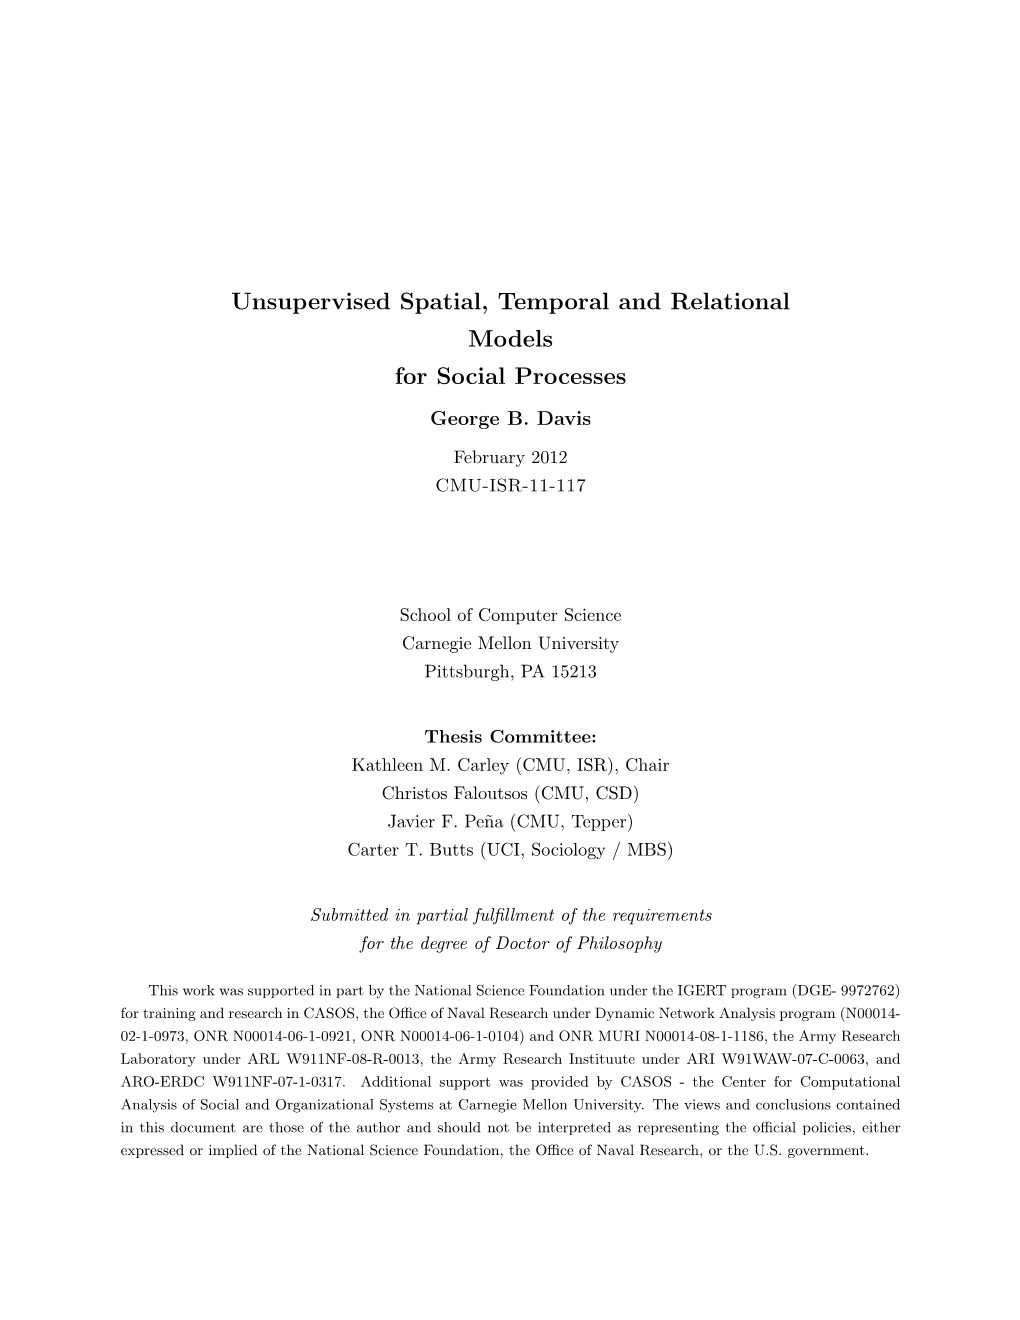 Unsupervised Spatial, Temporal and Relational Models for Social Processes